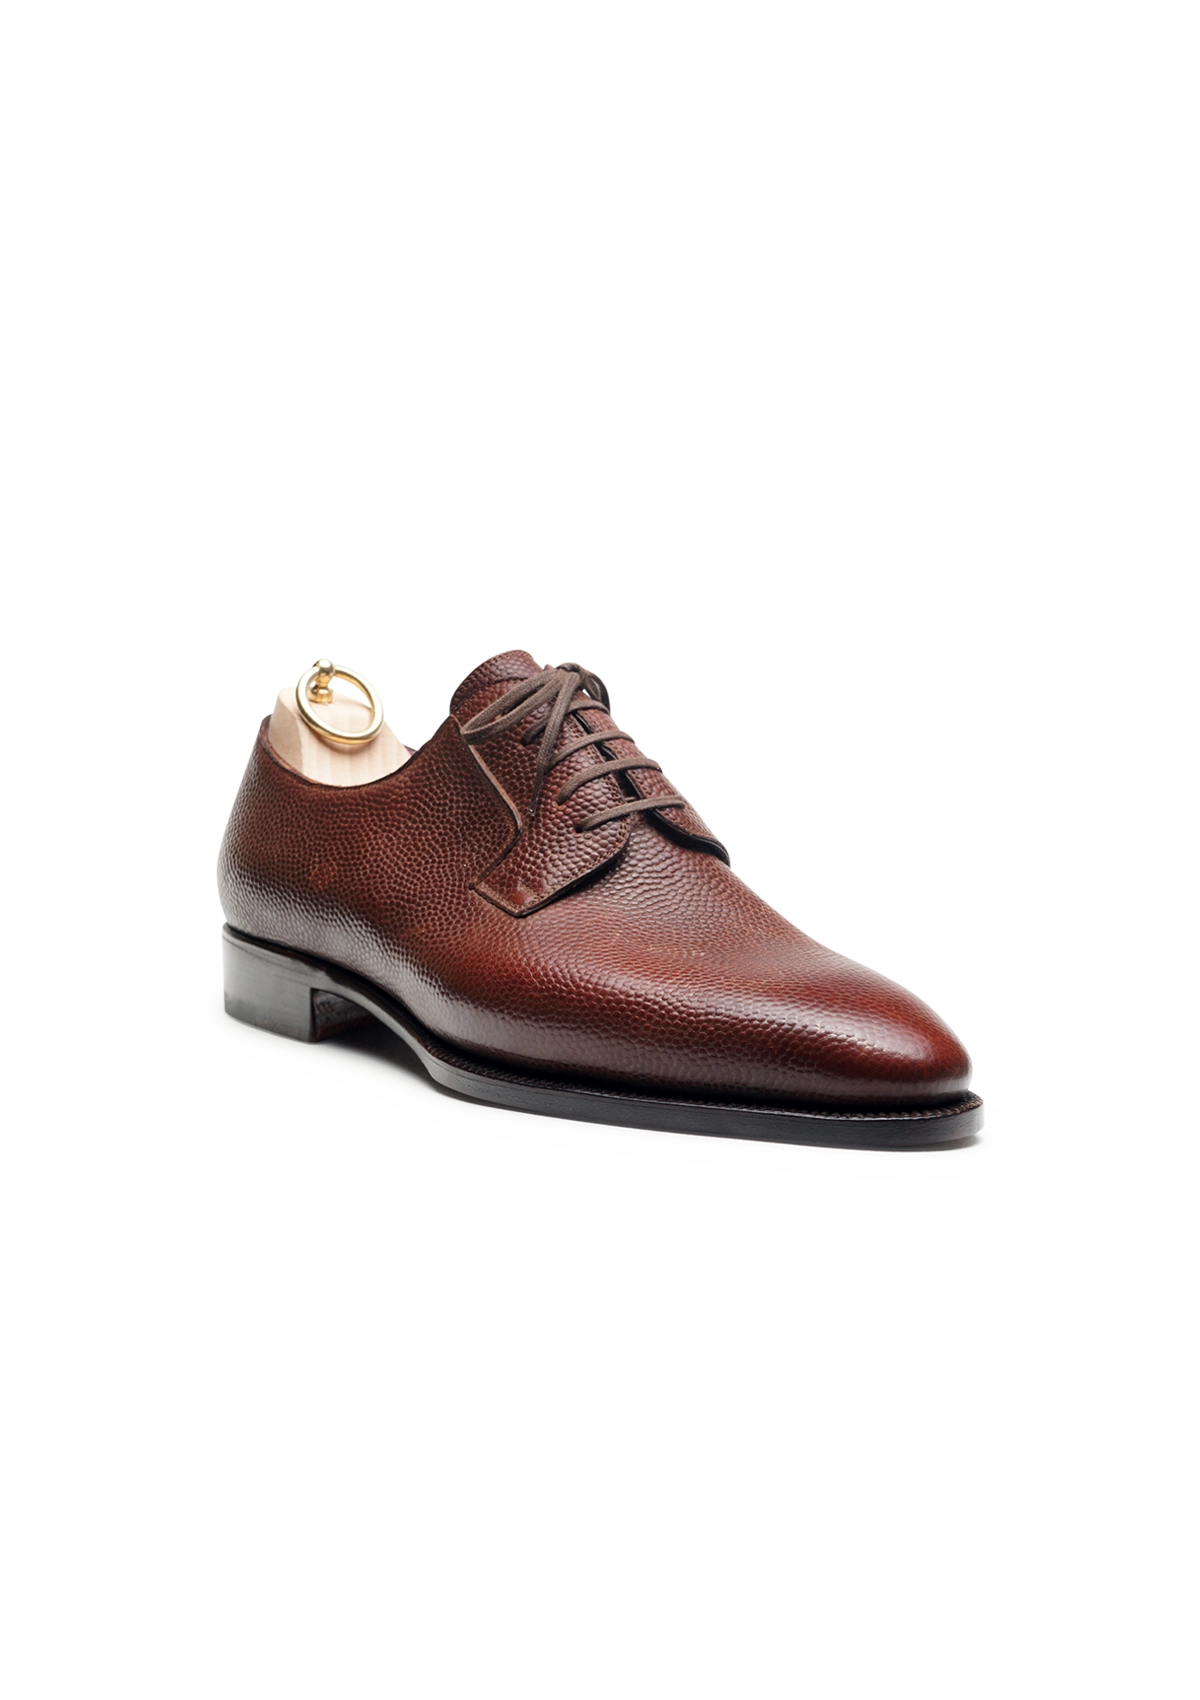 Brown Wholecut Derbies in Basketball Leather